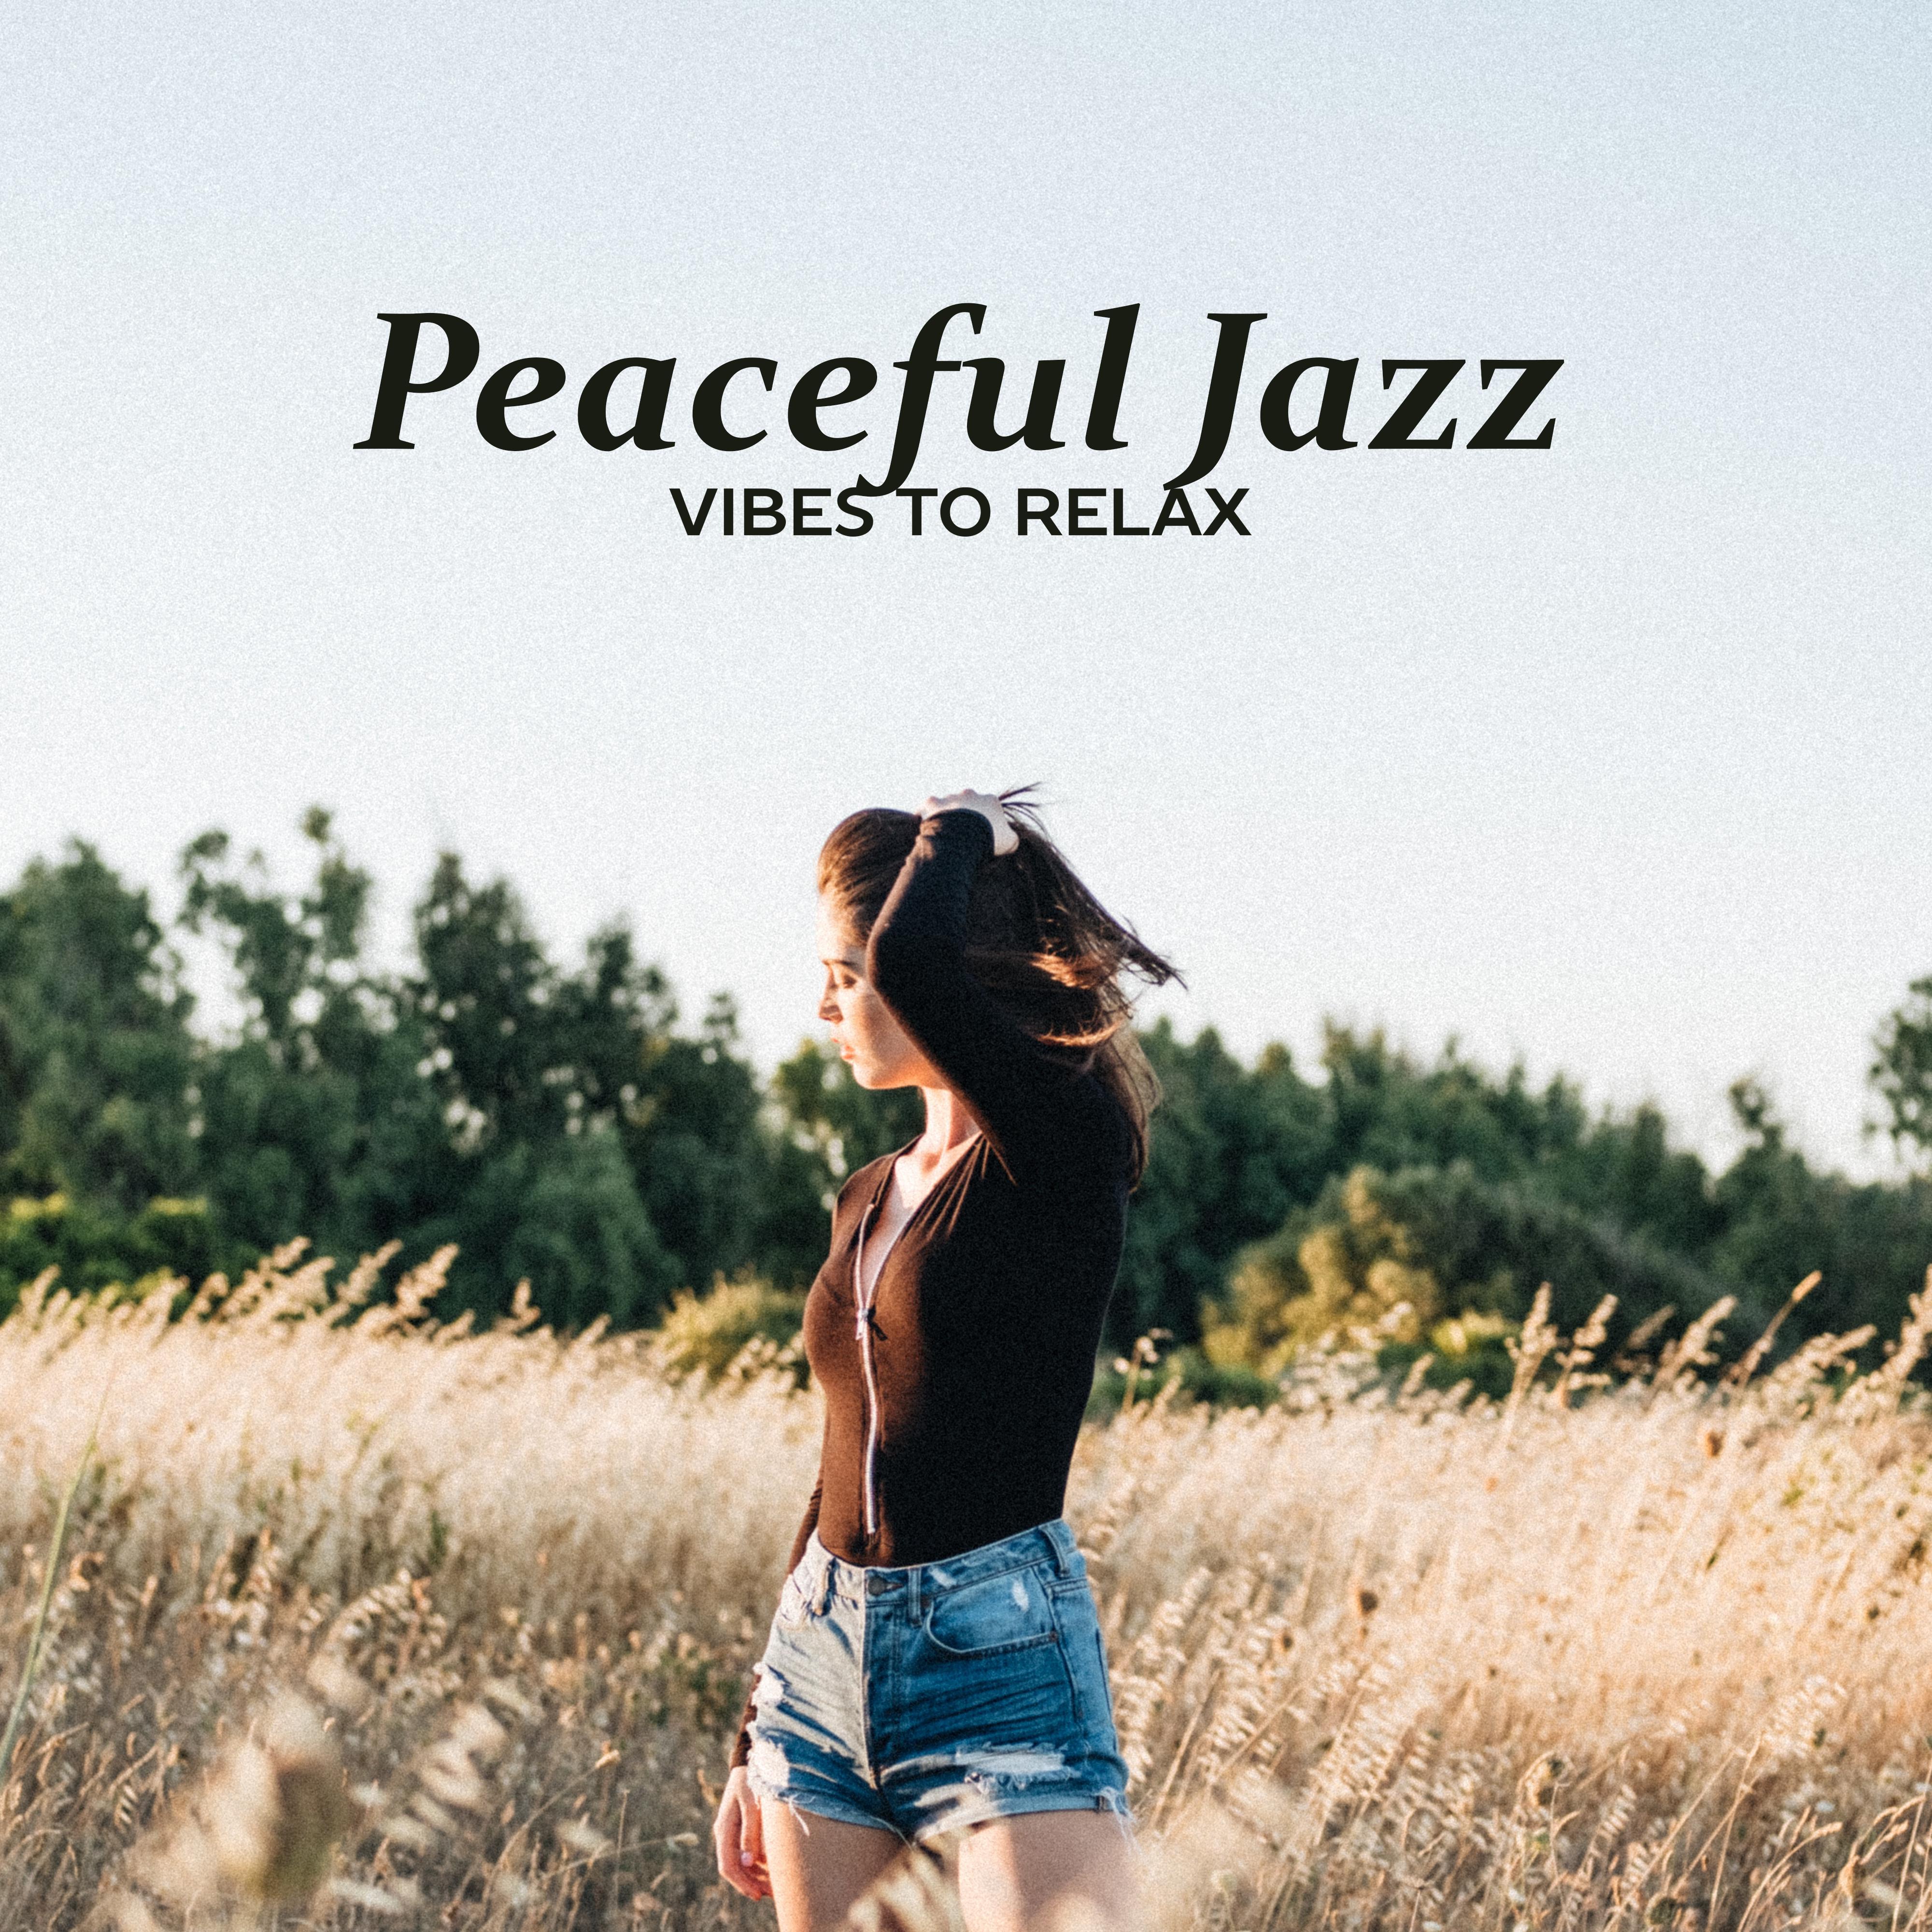 Peaceful Jazz Vibes to Relax